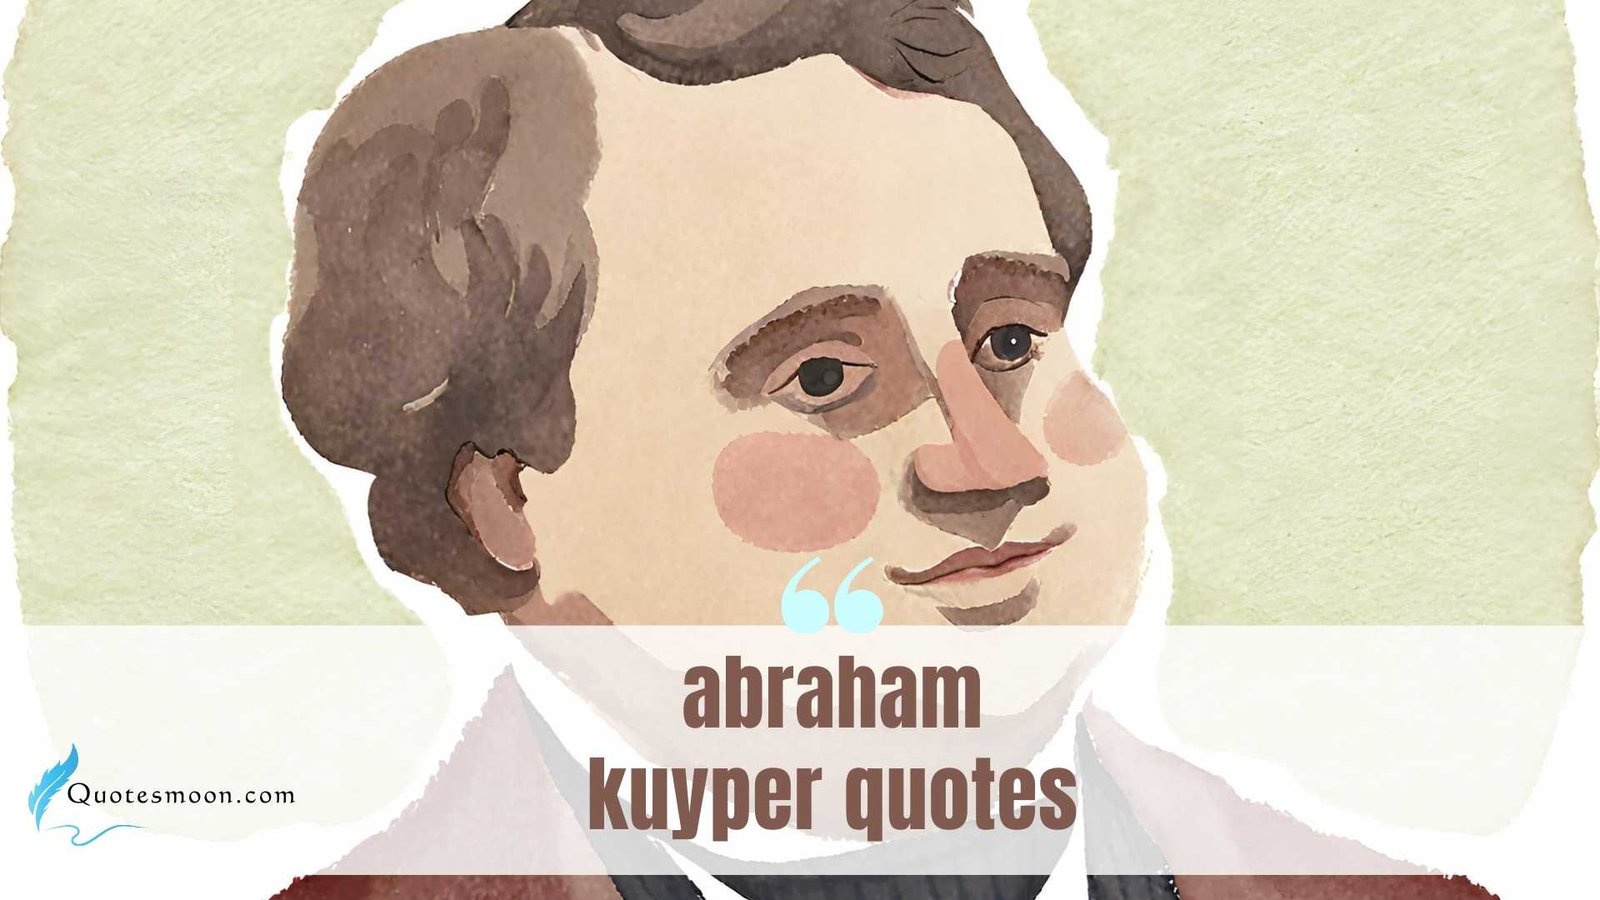 abraham kuyper quotes images